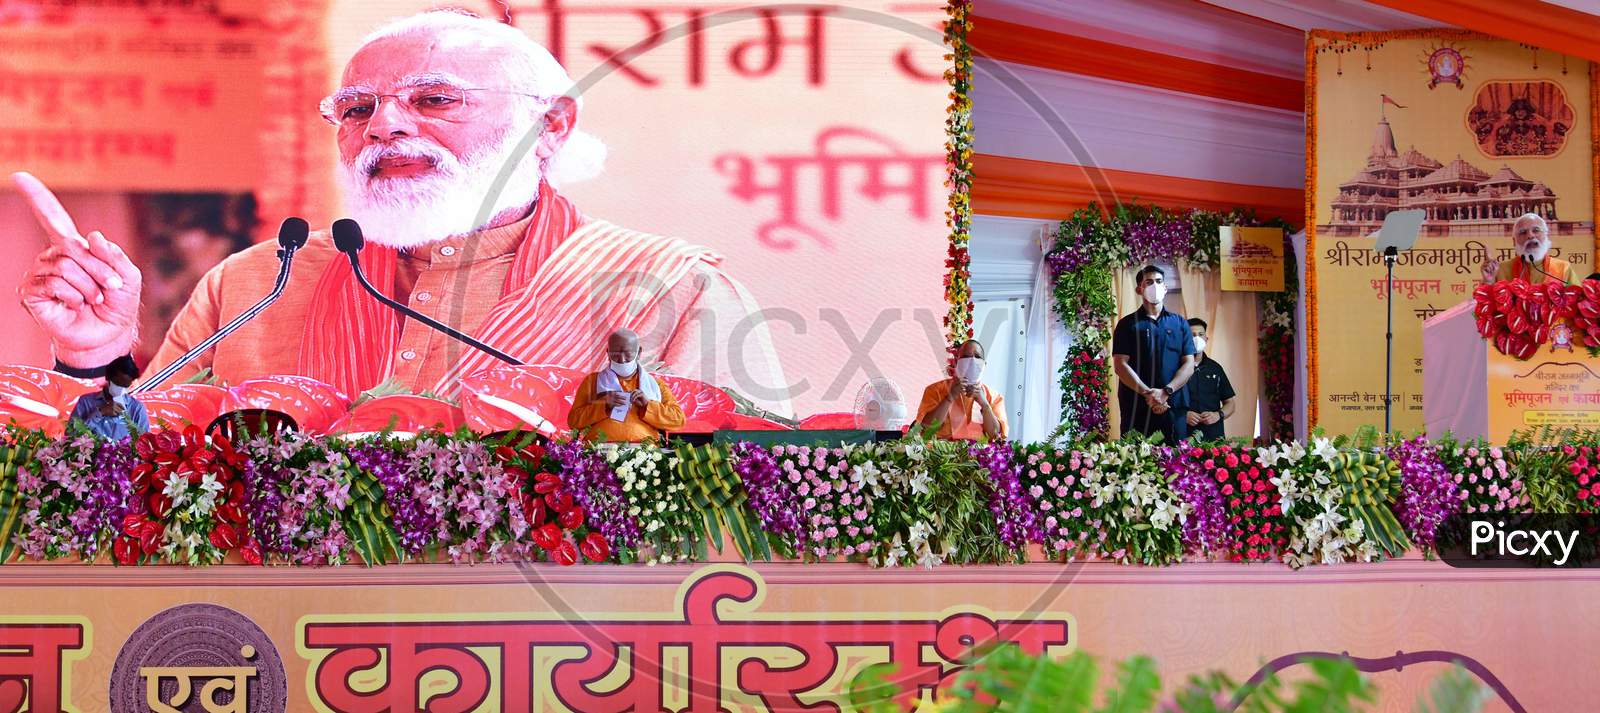 Prime Minister Narendra Modi, along with Uttar Pradesh Chief Minister Yogi Adityanath and Rashtriya Swayamsevak Sangh (RSS) chief Mohan Bhagwat, address people after the foundation laying ceremony for the Hindu Lord Ram's temple, in Ayodhya, India, August 5, 2020.